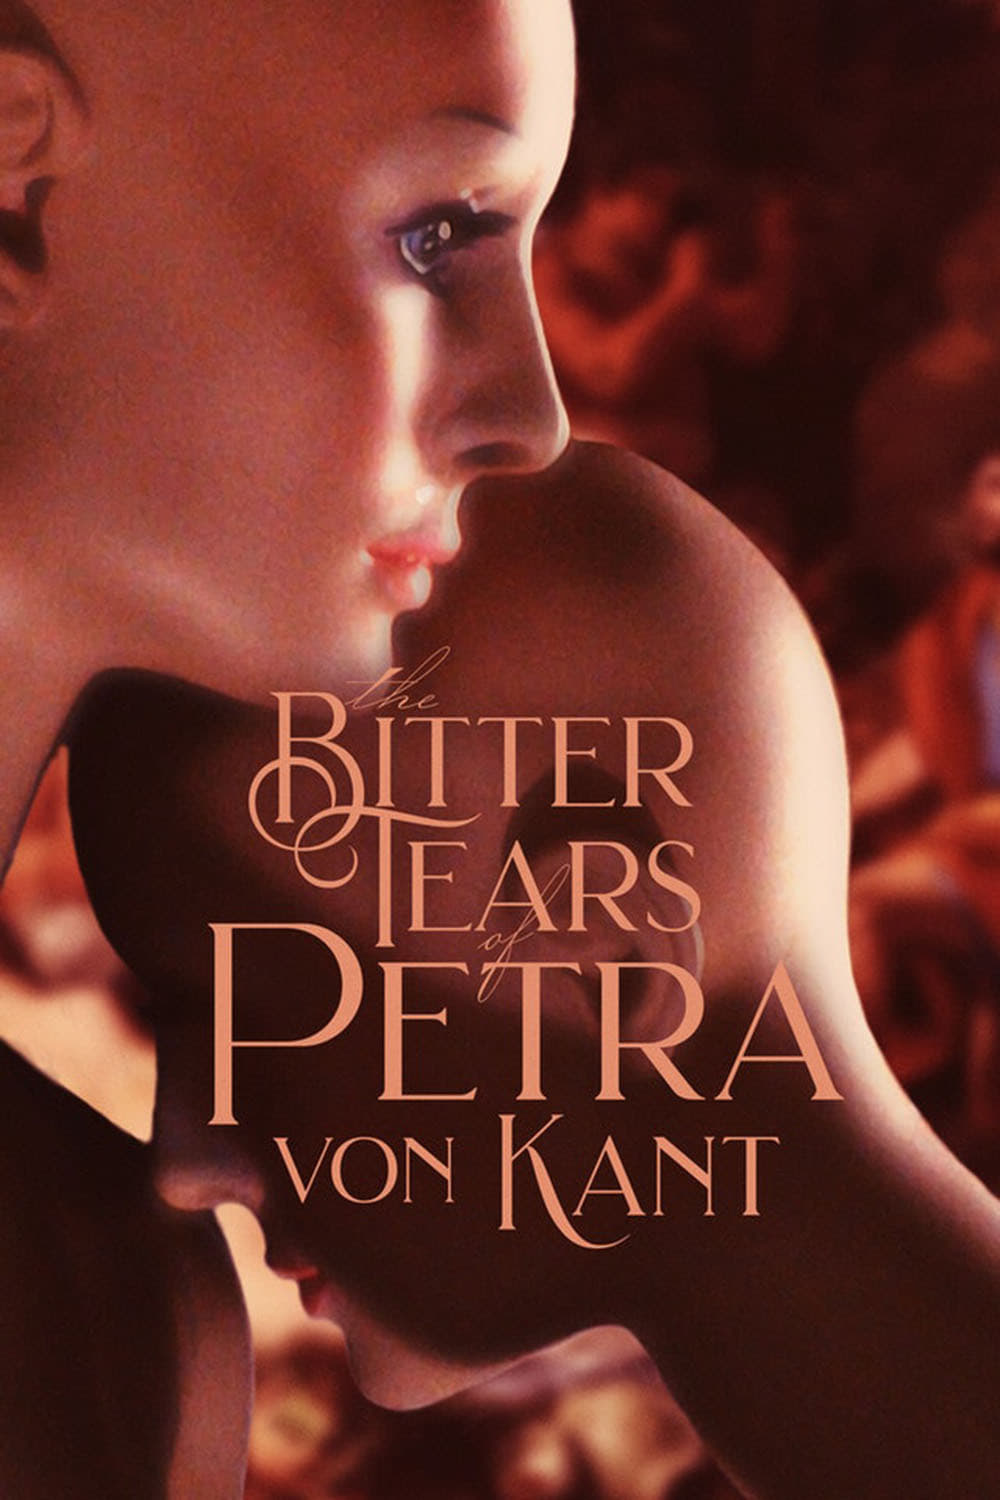 "The Bitter Tears of Petra von Kant" (1972)